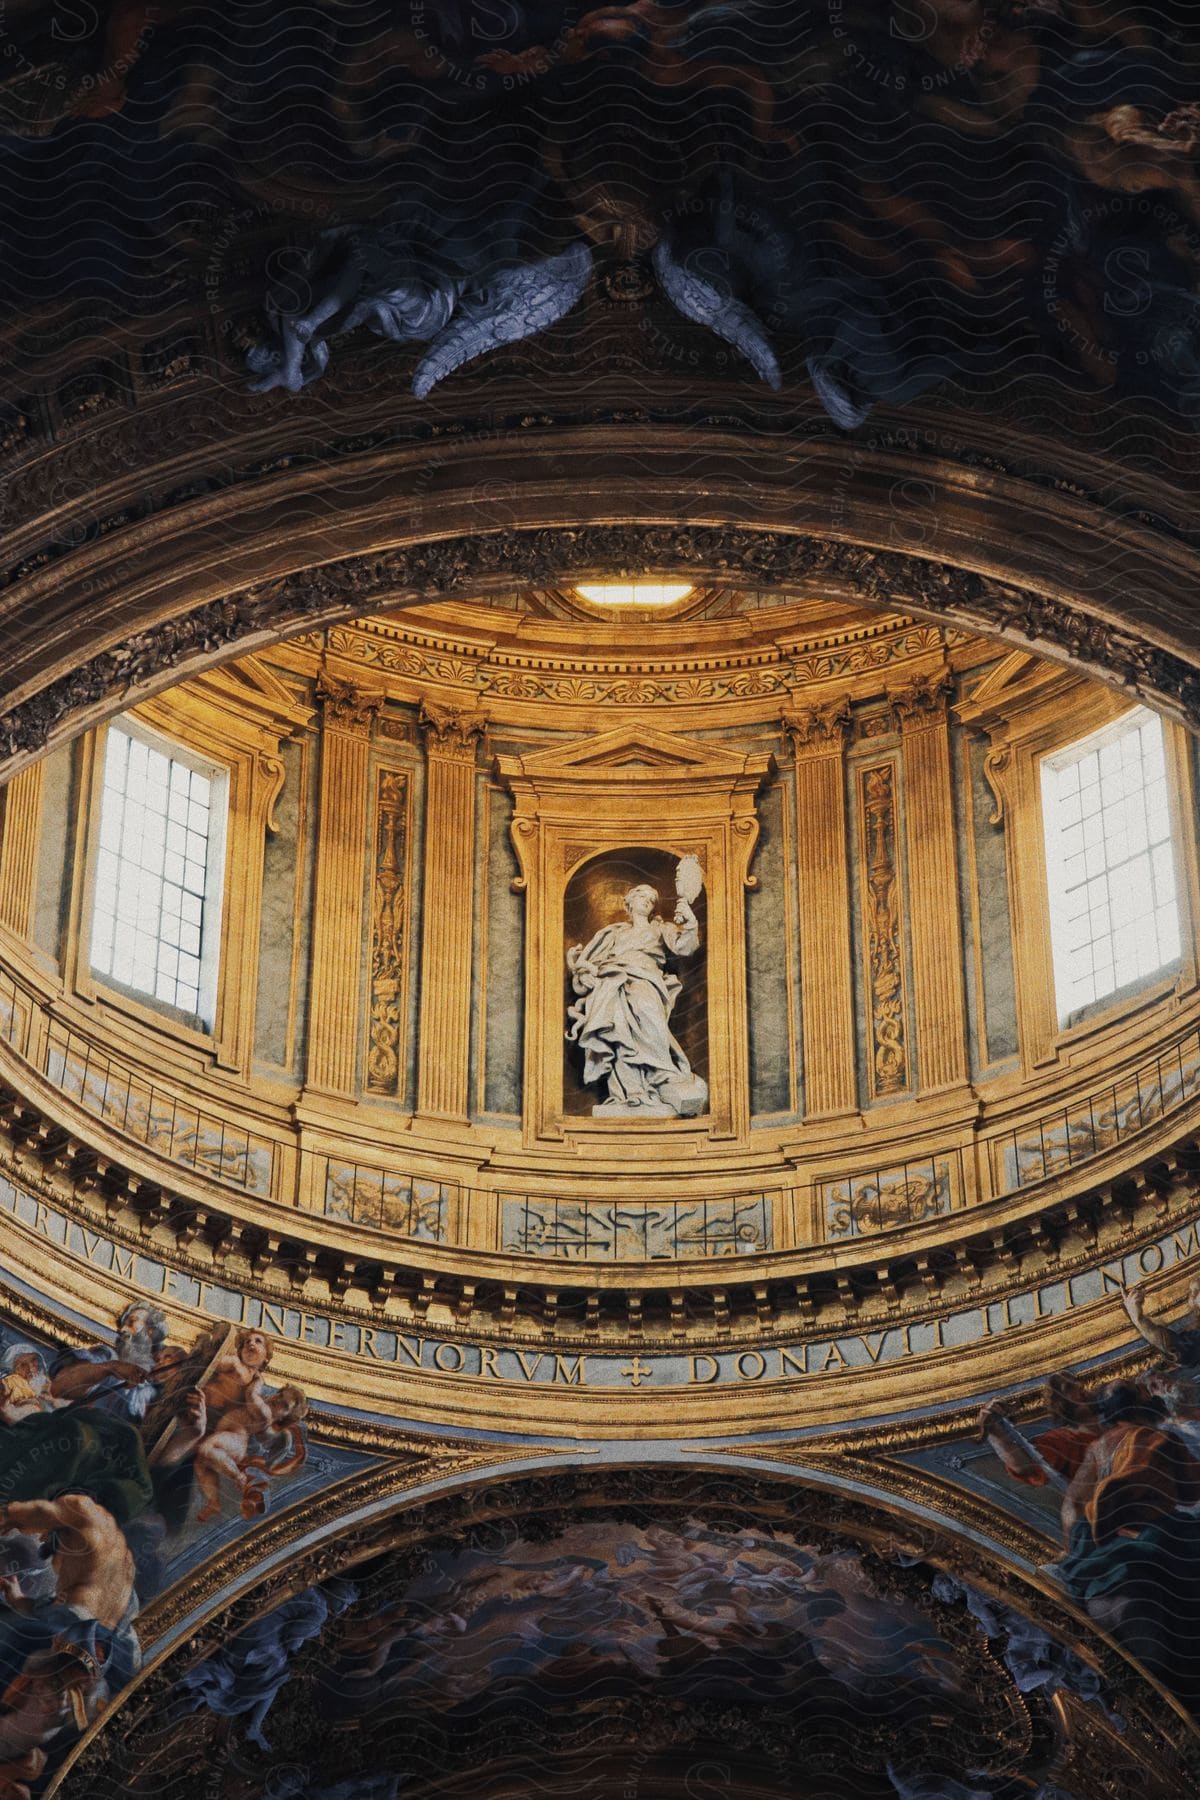 The Inside Of A Church With A Statue Of A Religious Figure In The Dome